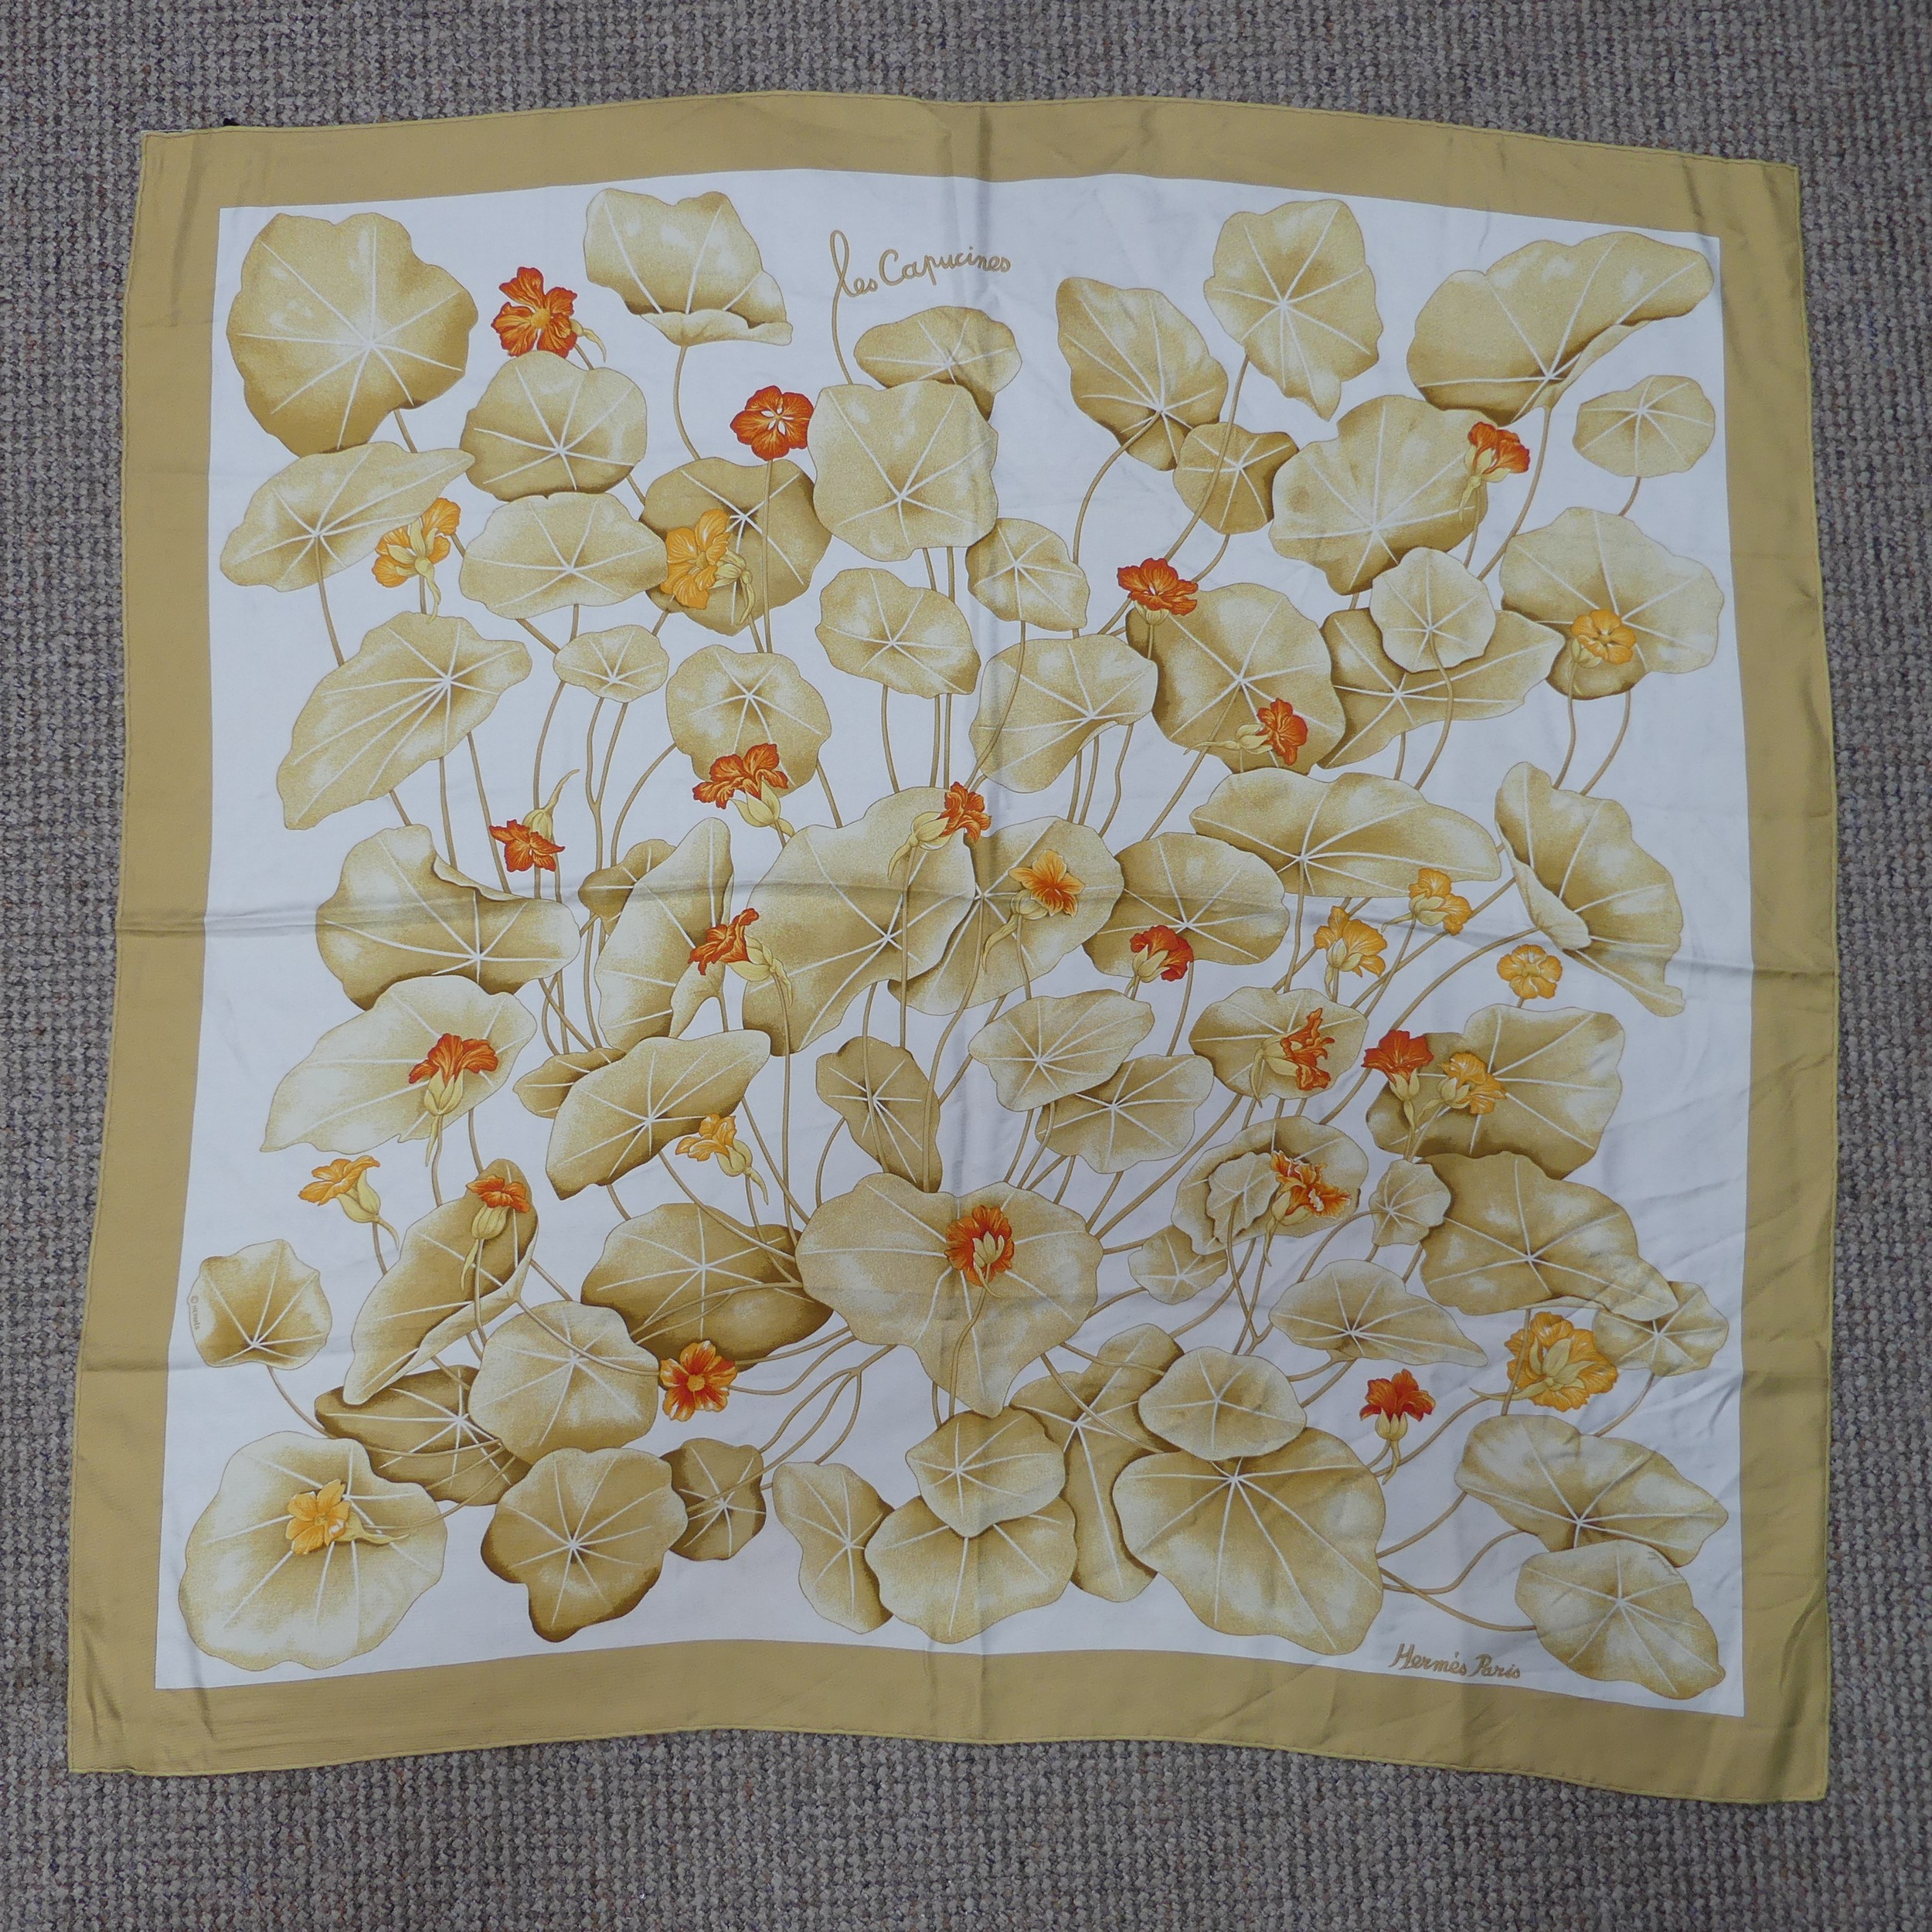 Three Hermès silk twill scarves: 'Les Capucines', orange and gold on cream background, Crown or